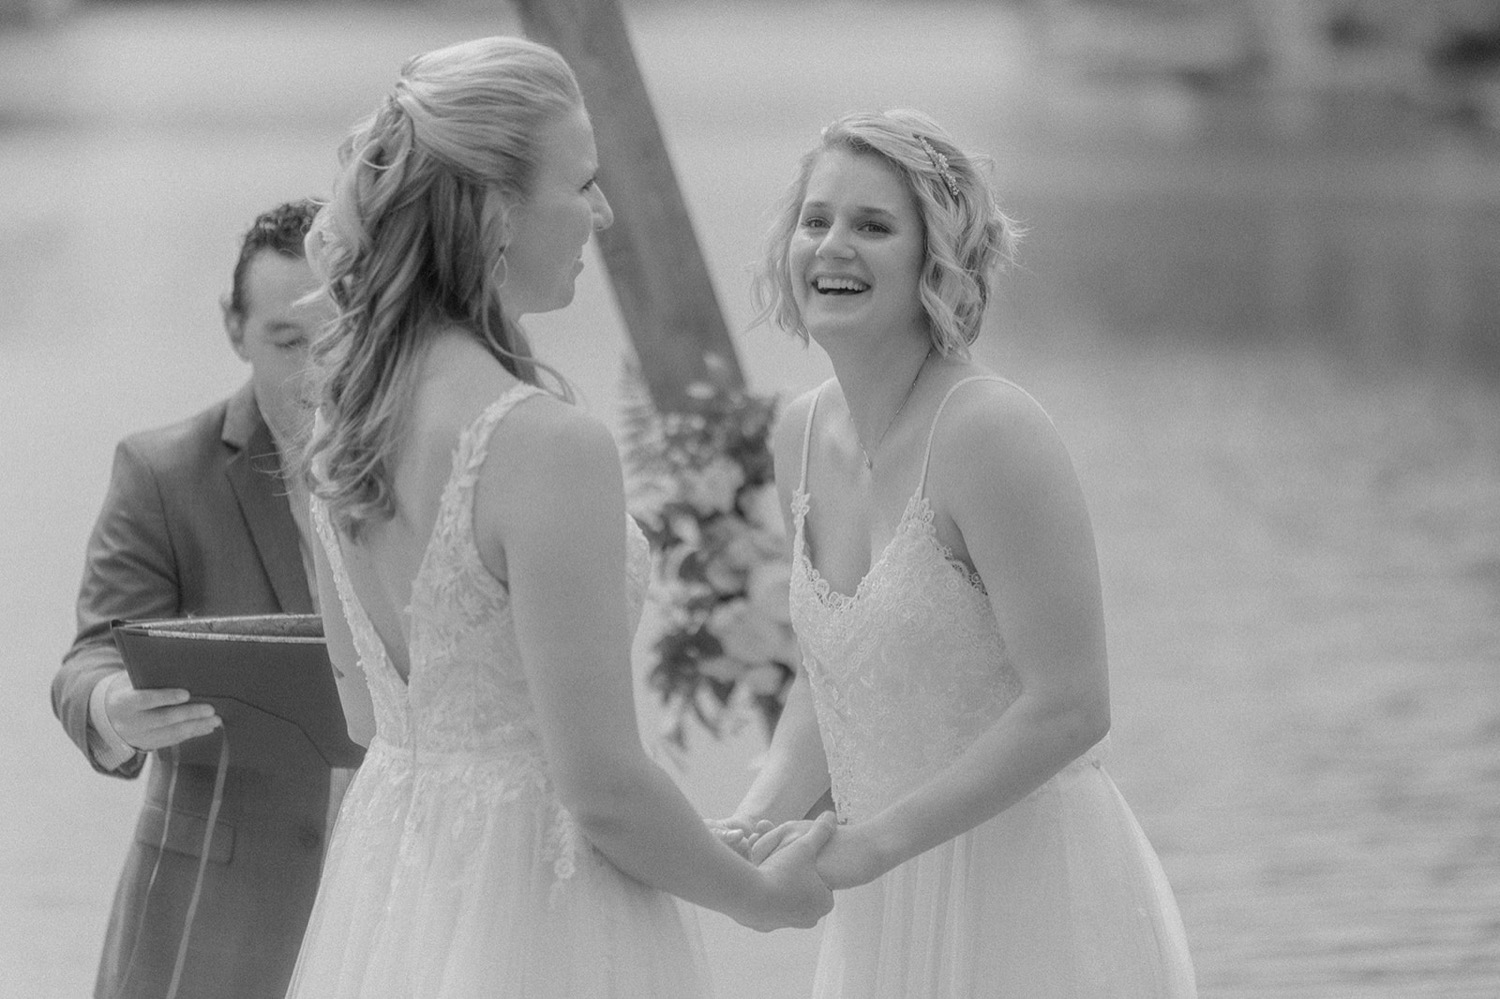 brides holding hands laughing during ceremony wedding